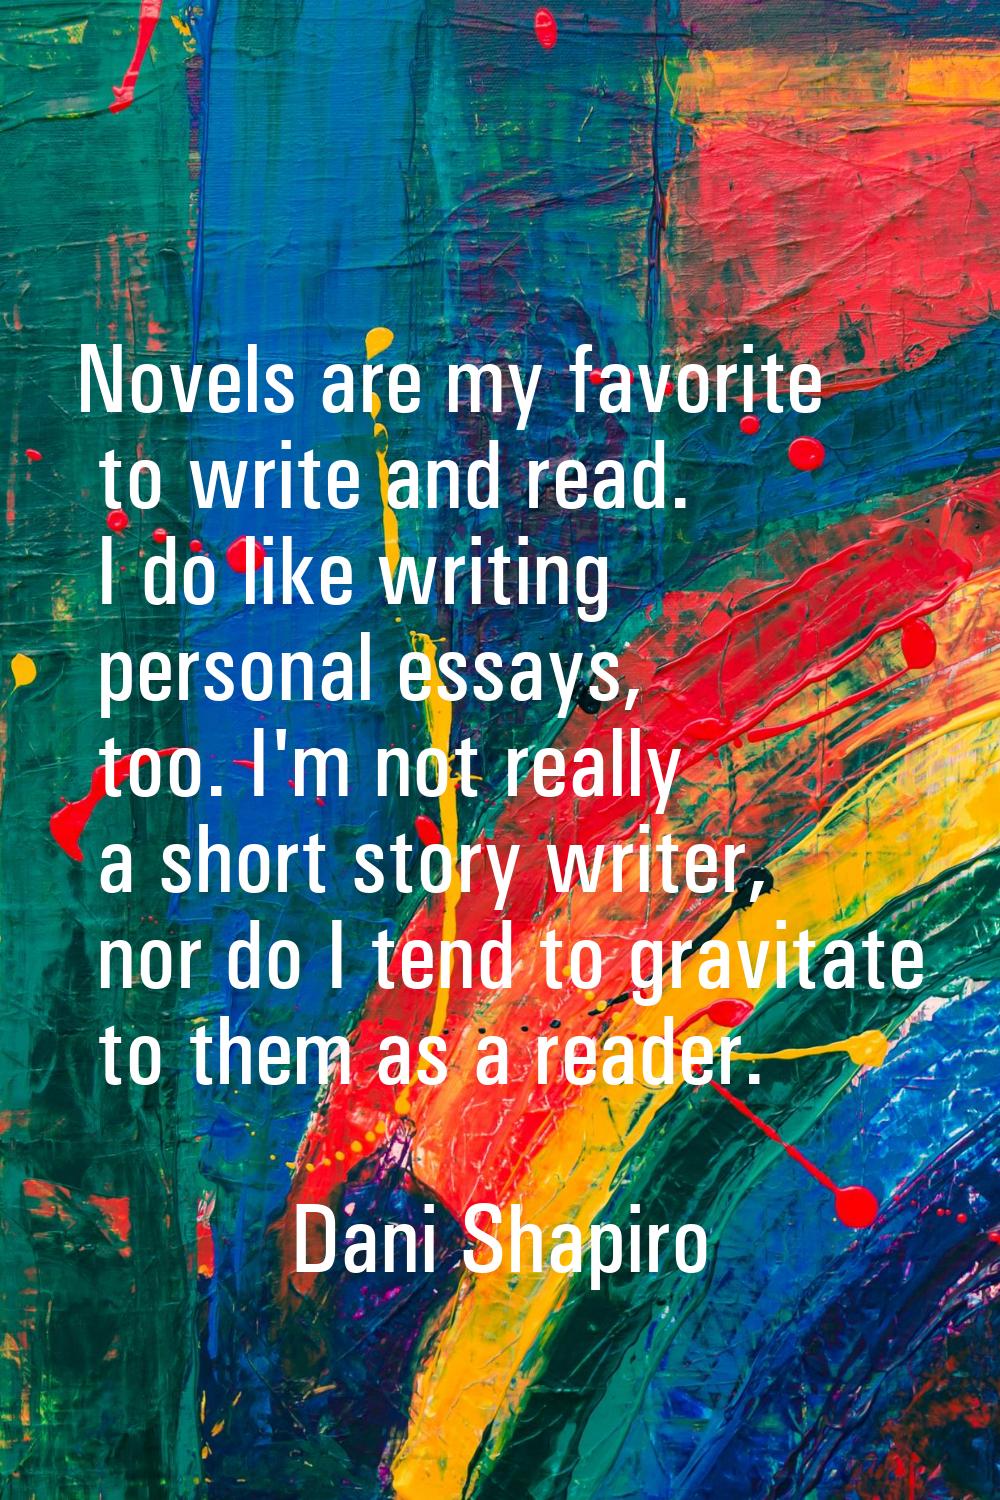 Novels are my favorite to write and read. I do like writing personal essays, too. I'm not really a 